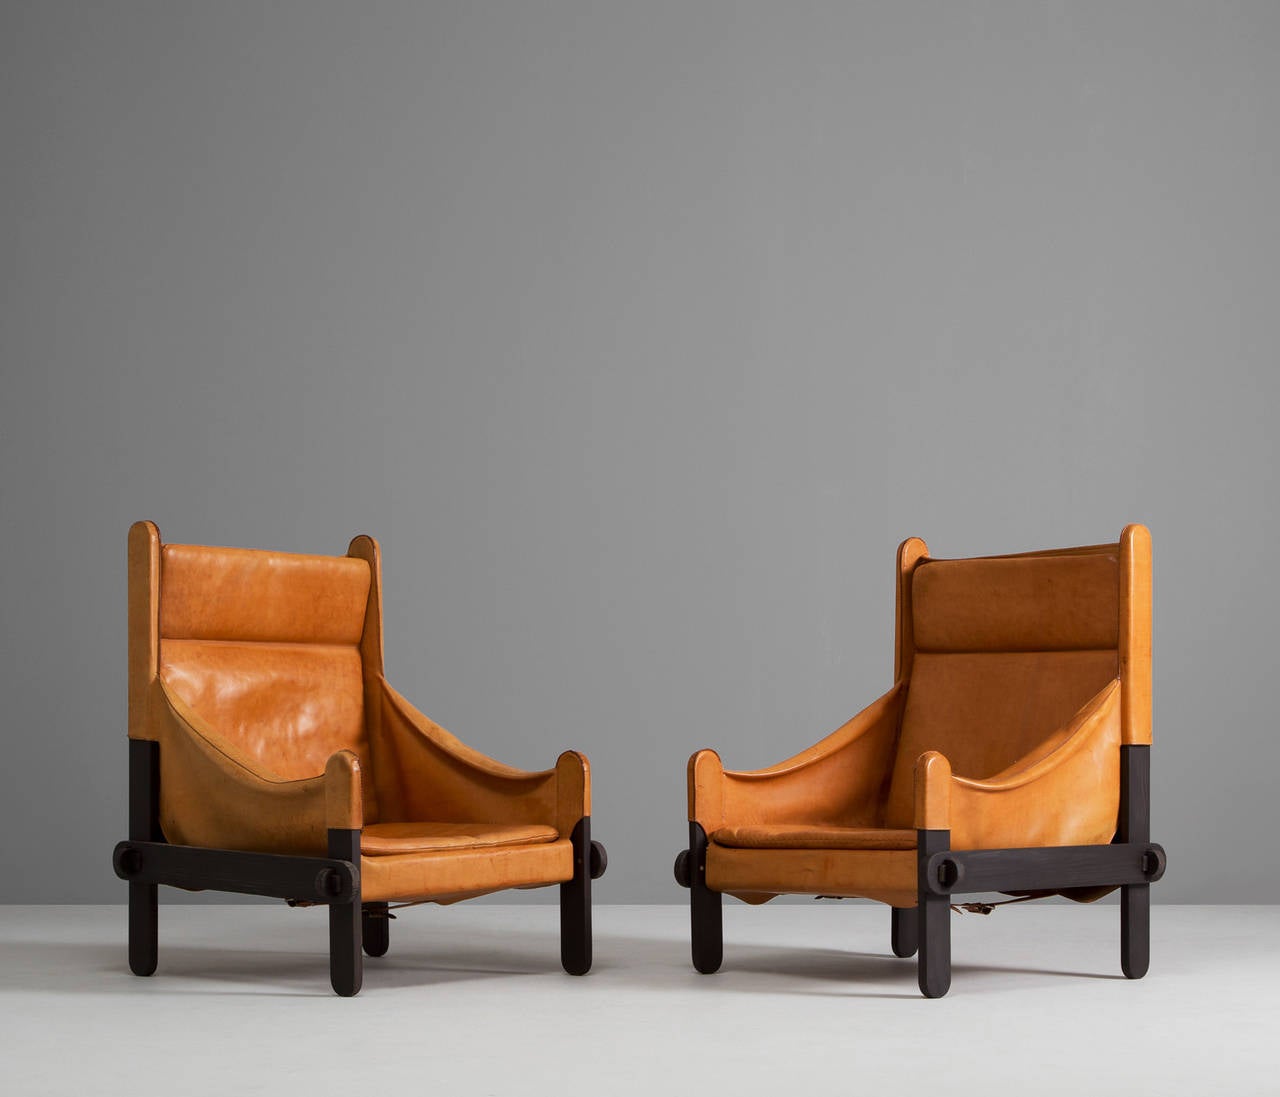 Armchairs, leather, wood, France, 1950s. 

These lounge chairs holds a solid crafted frame with decent wood details/joints.
The frame is 'covered' with nice thick leather with a nice patina. The leather is still in very good condition but have